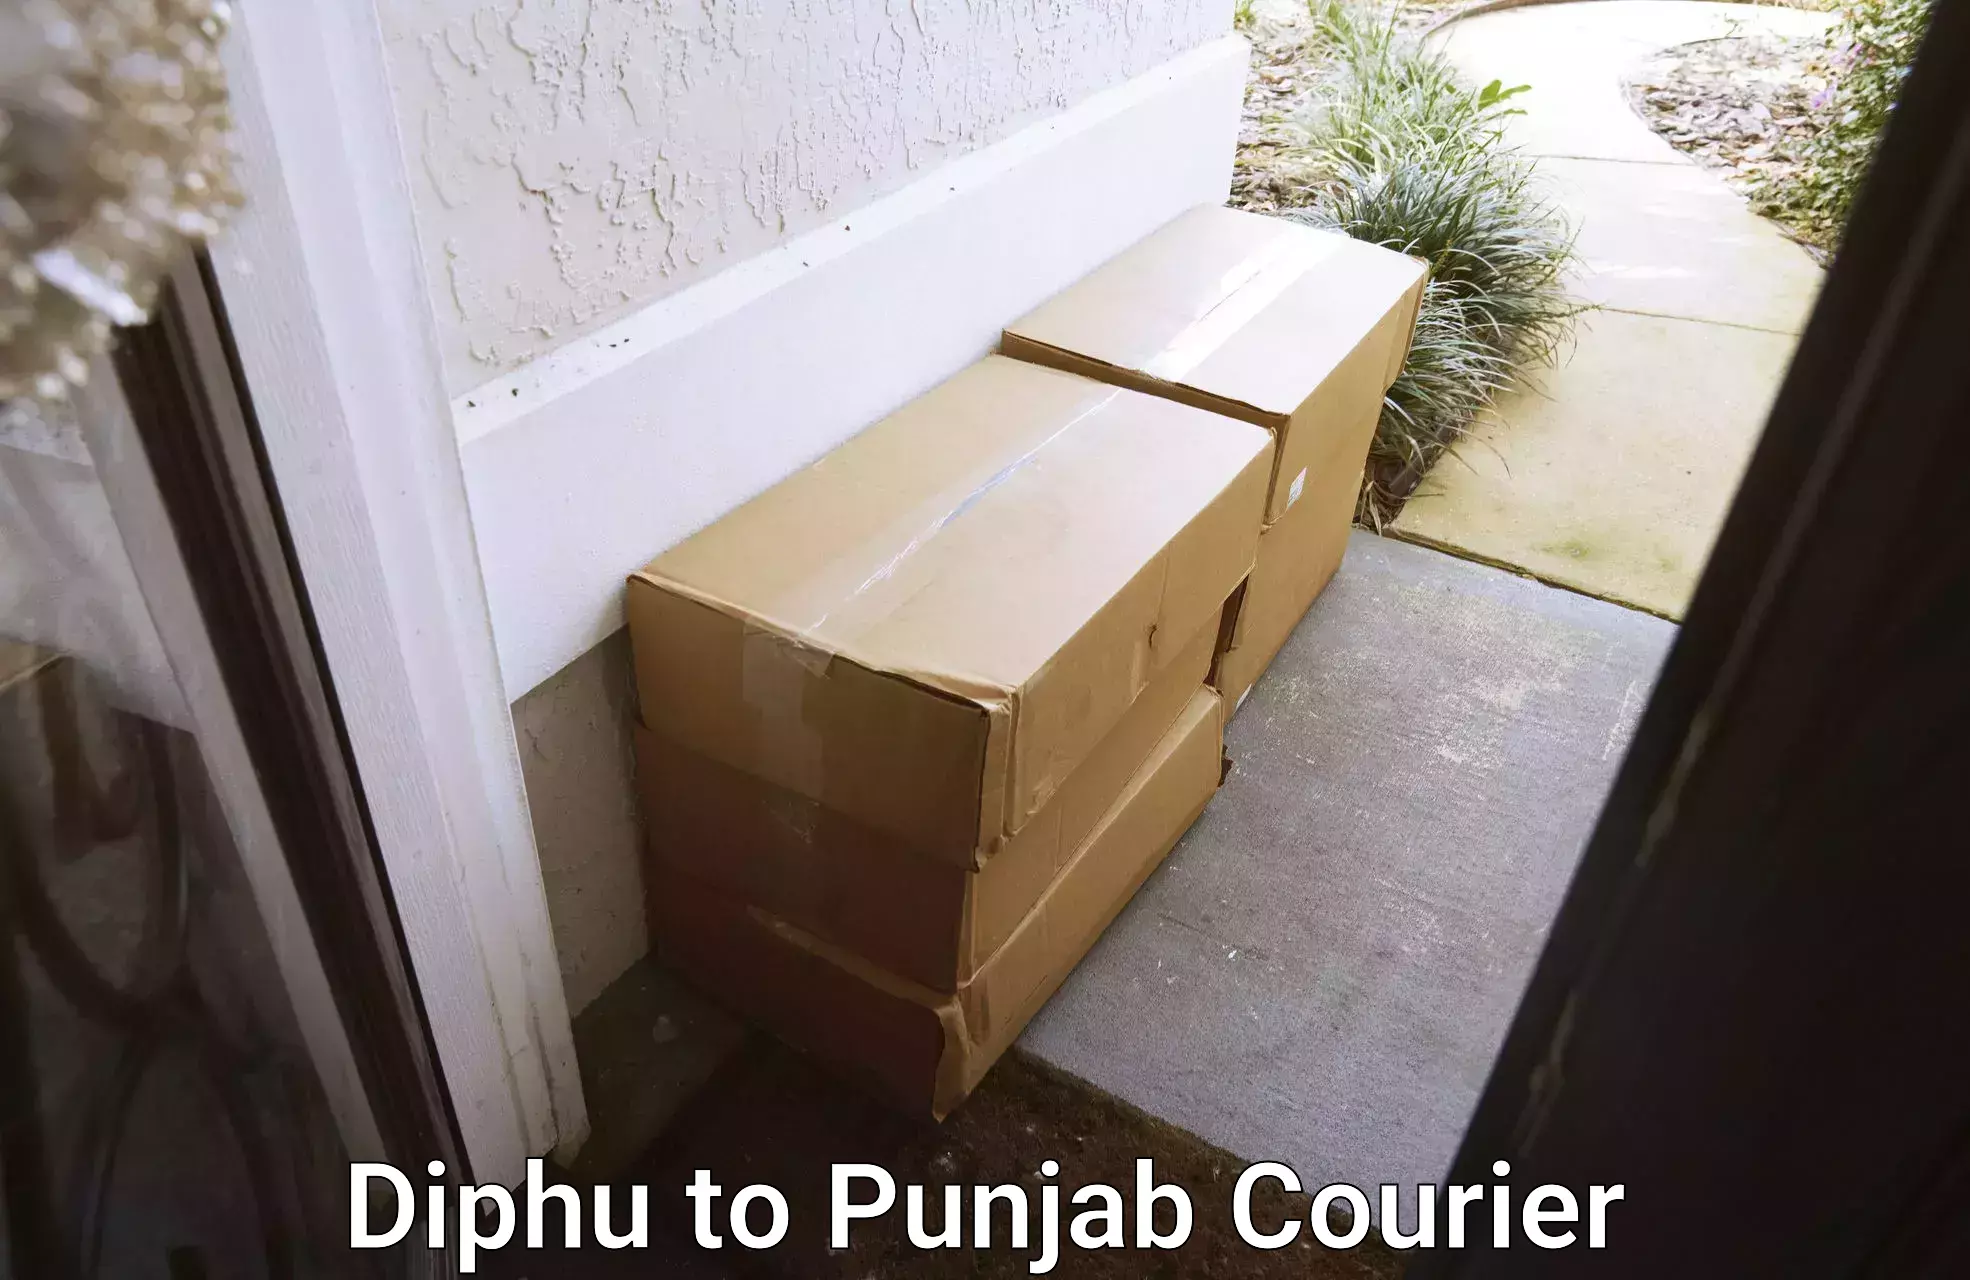 Next-generation courier services Diphu to Pathankot